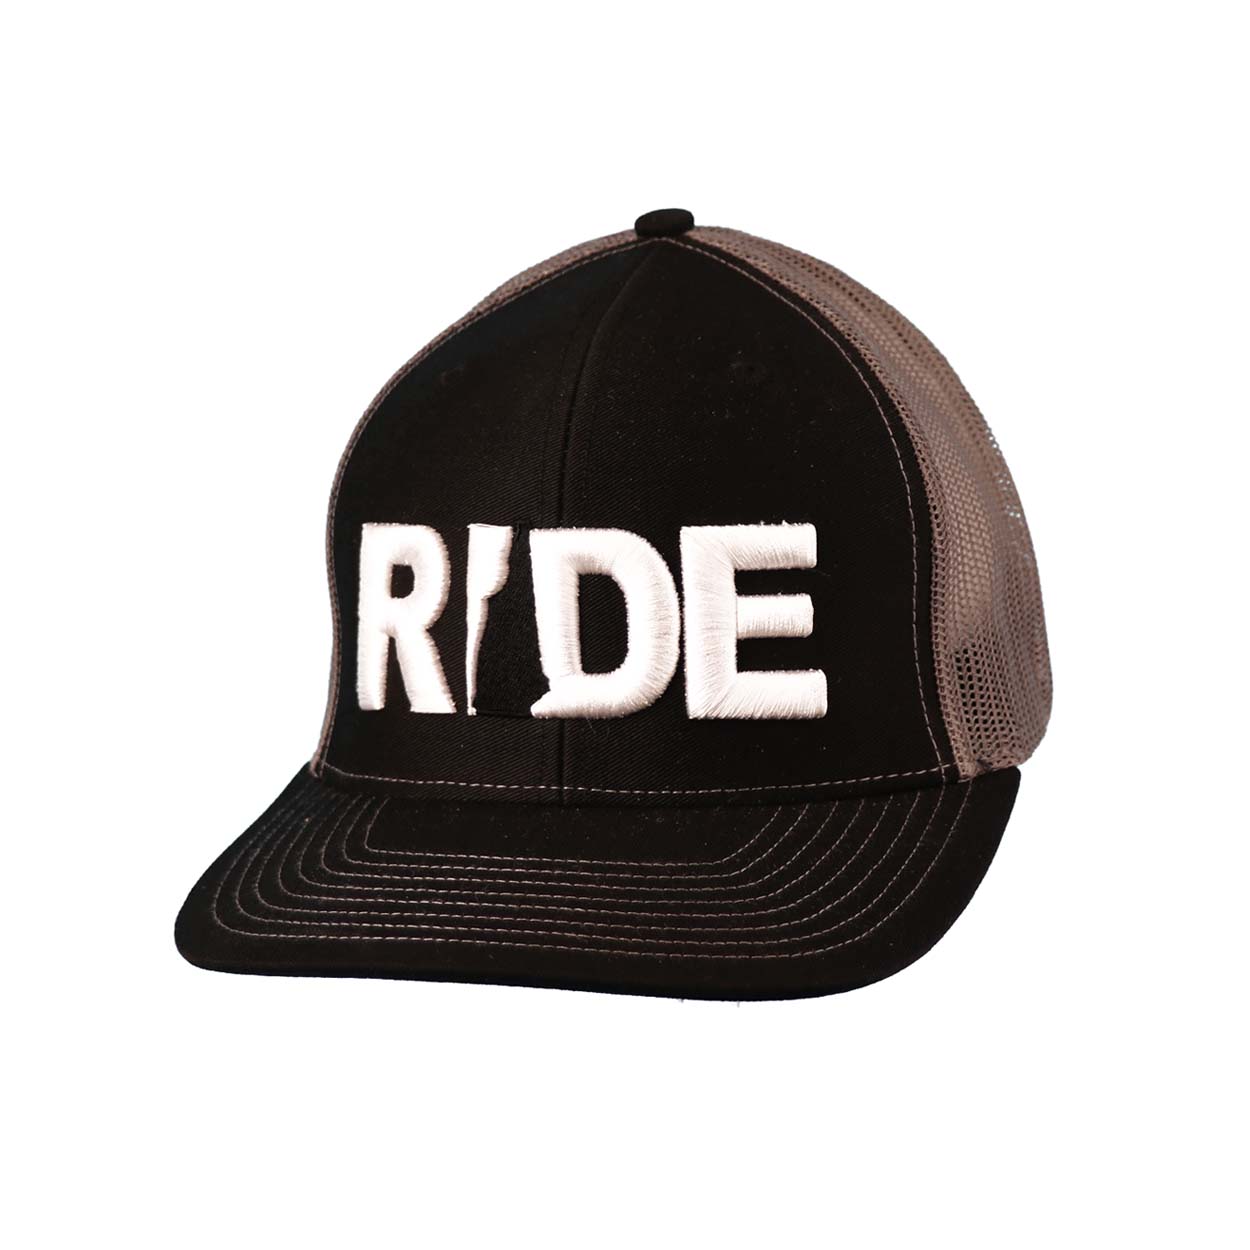 Ride New Hampshire Classic Pro 3D Puff Embroidered Snapback Trucker Hat Black/Gray